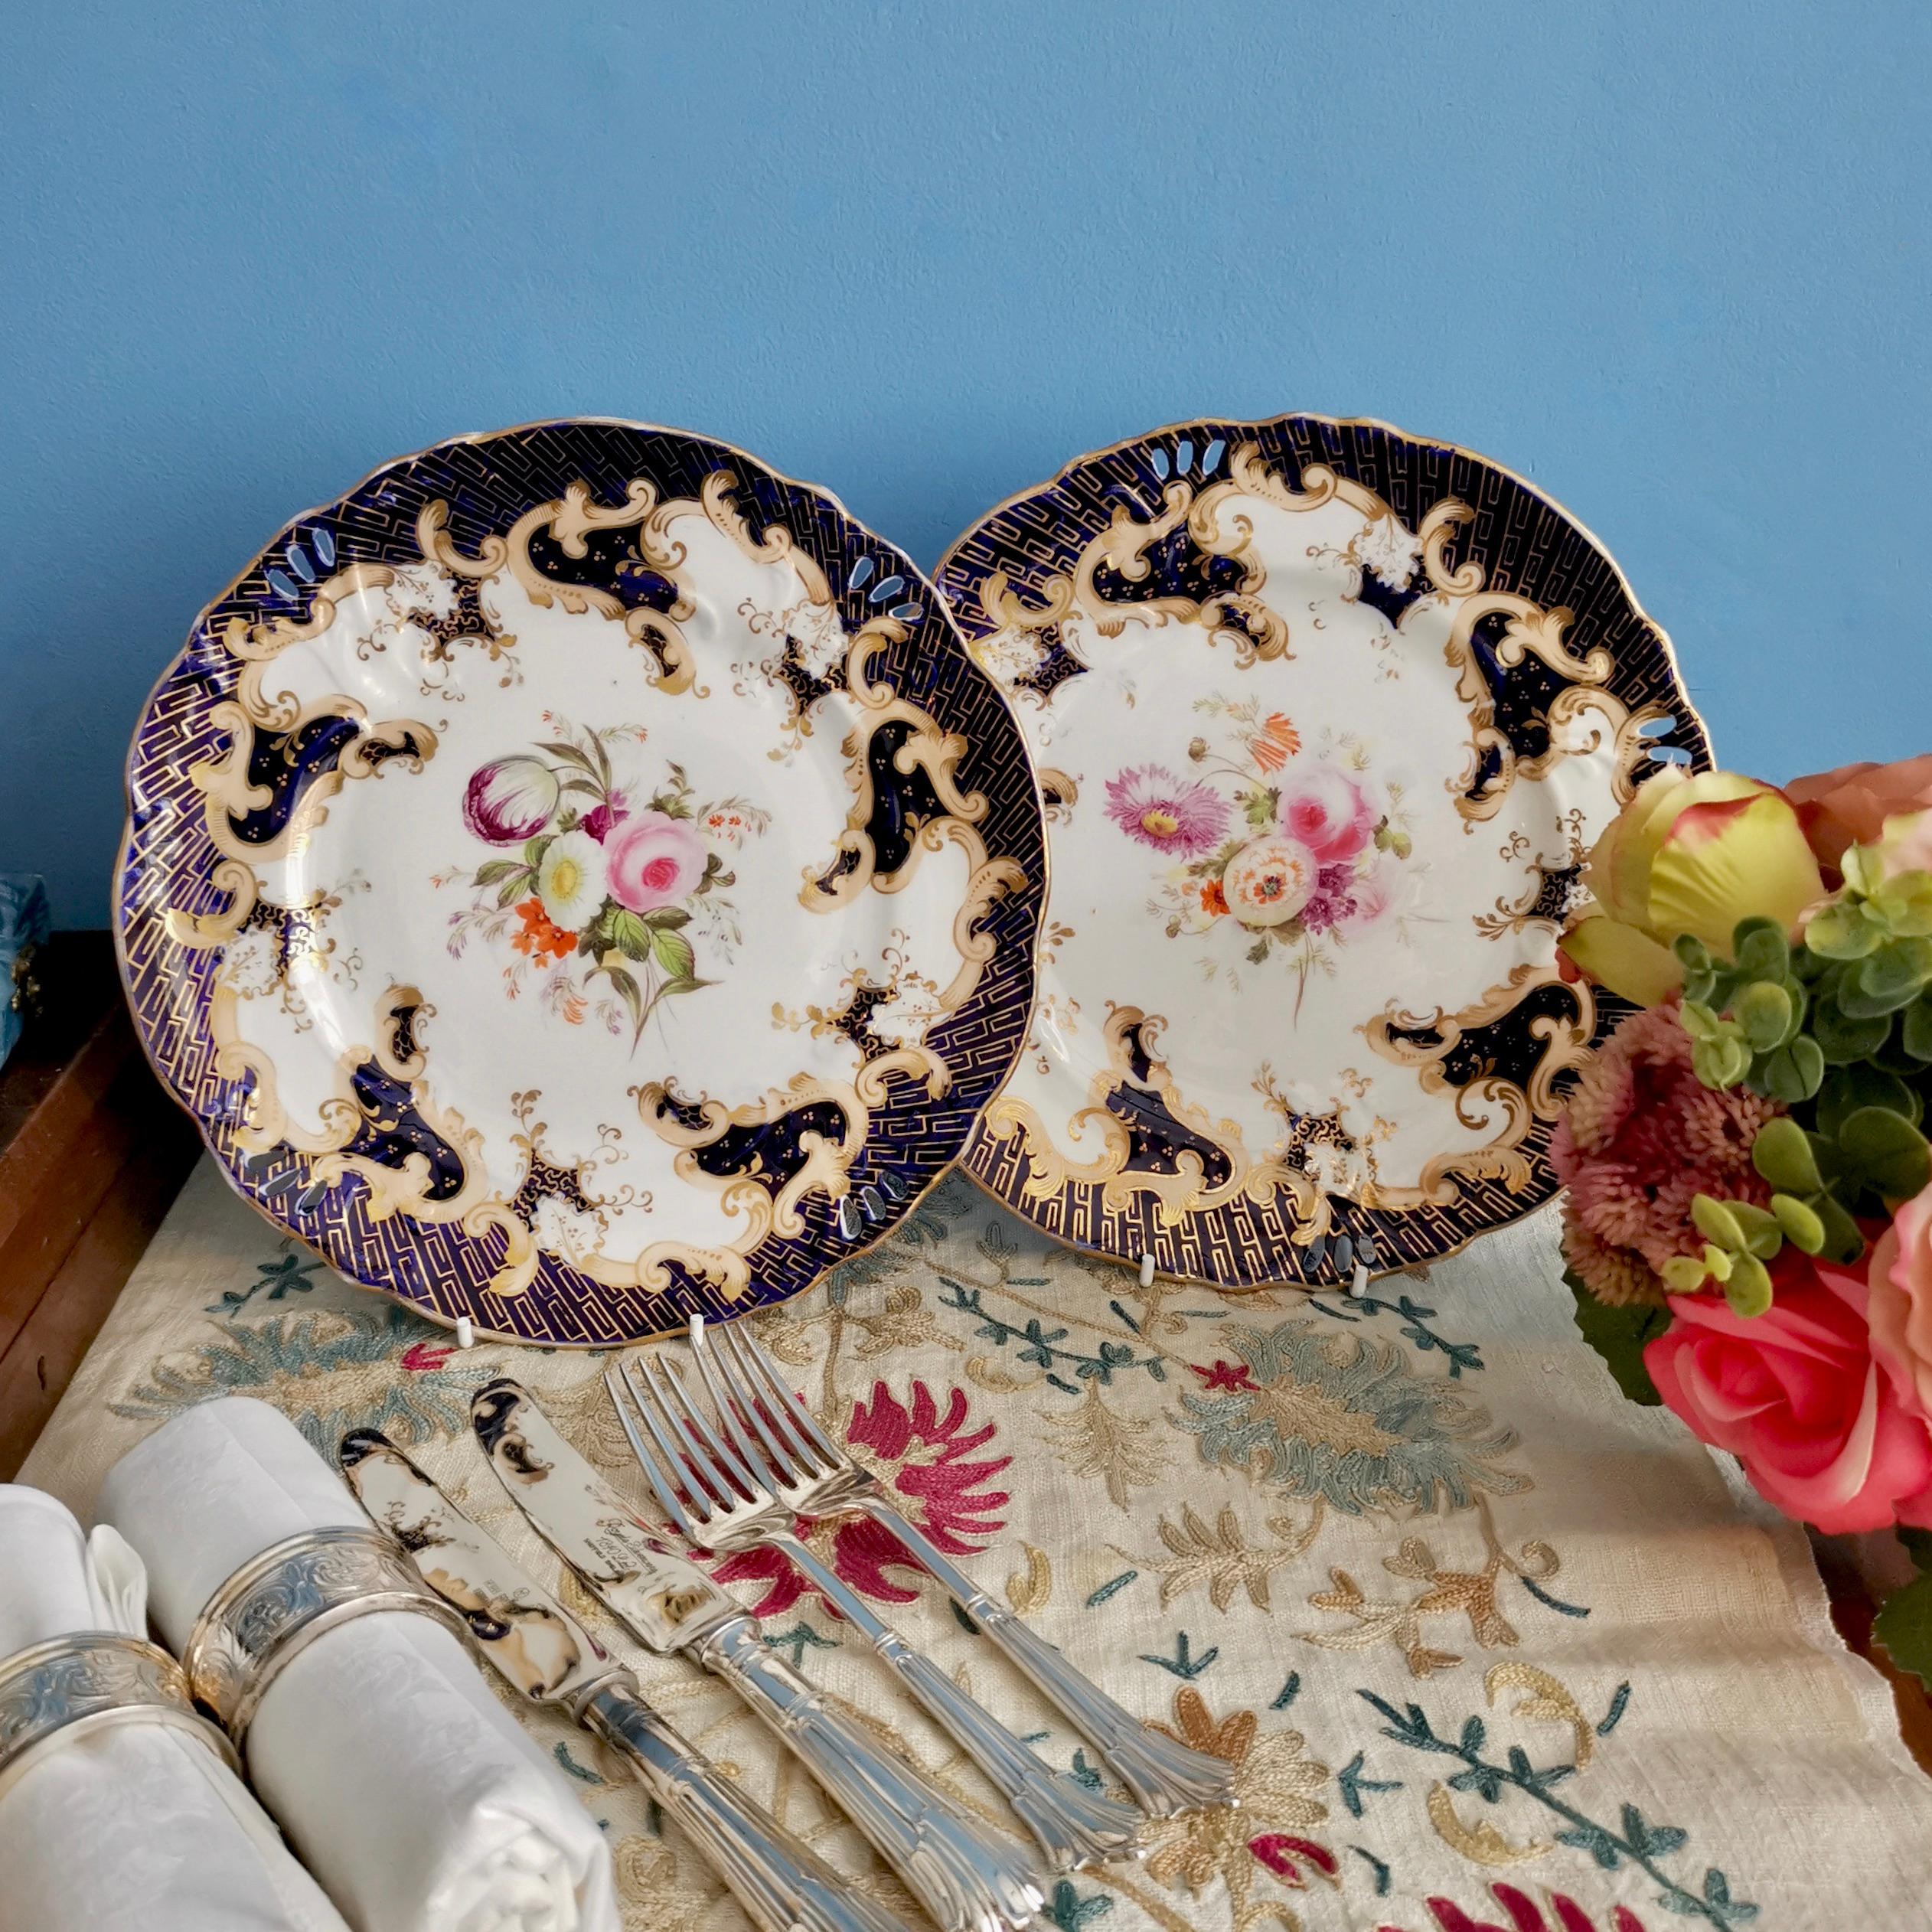 This is a beautiful dessert plate made by Samuel Alcock circa 1845 during Rococo Revival era. The plate is decorated in cobalt blue, gilt and beautiful flowers, and has a 